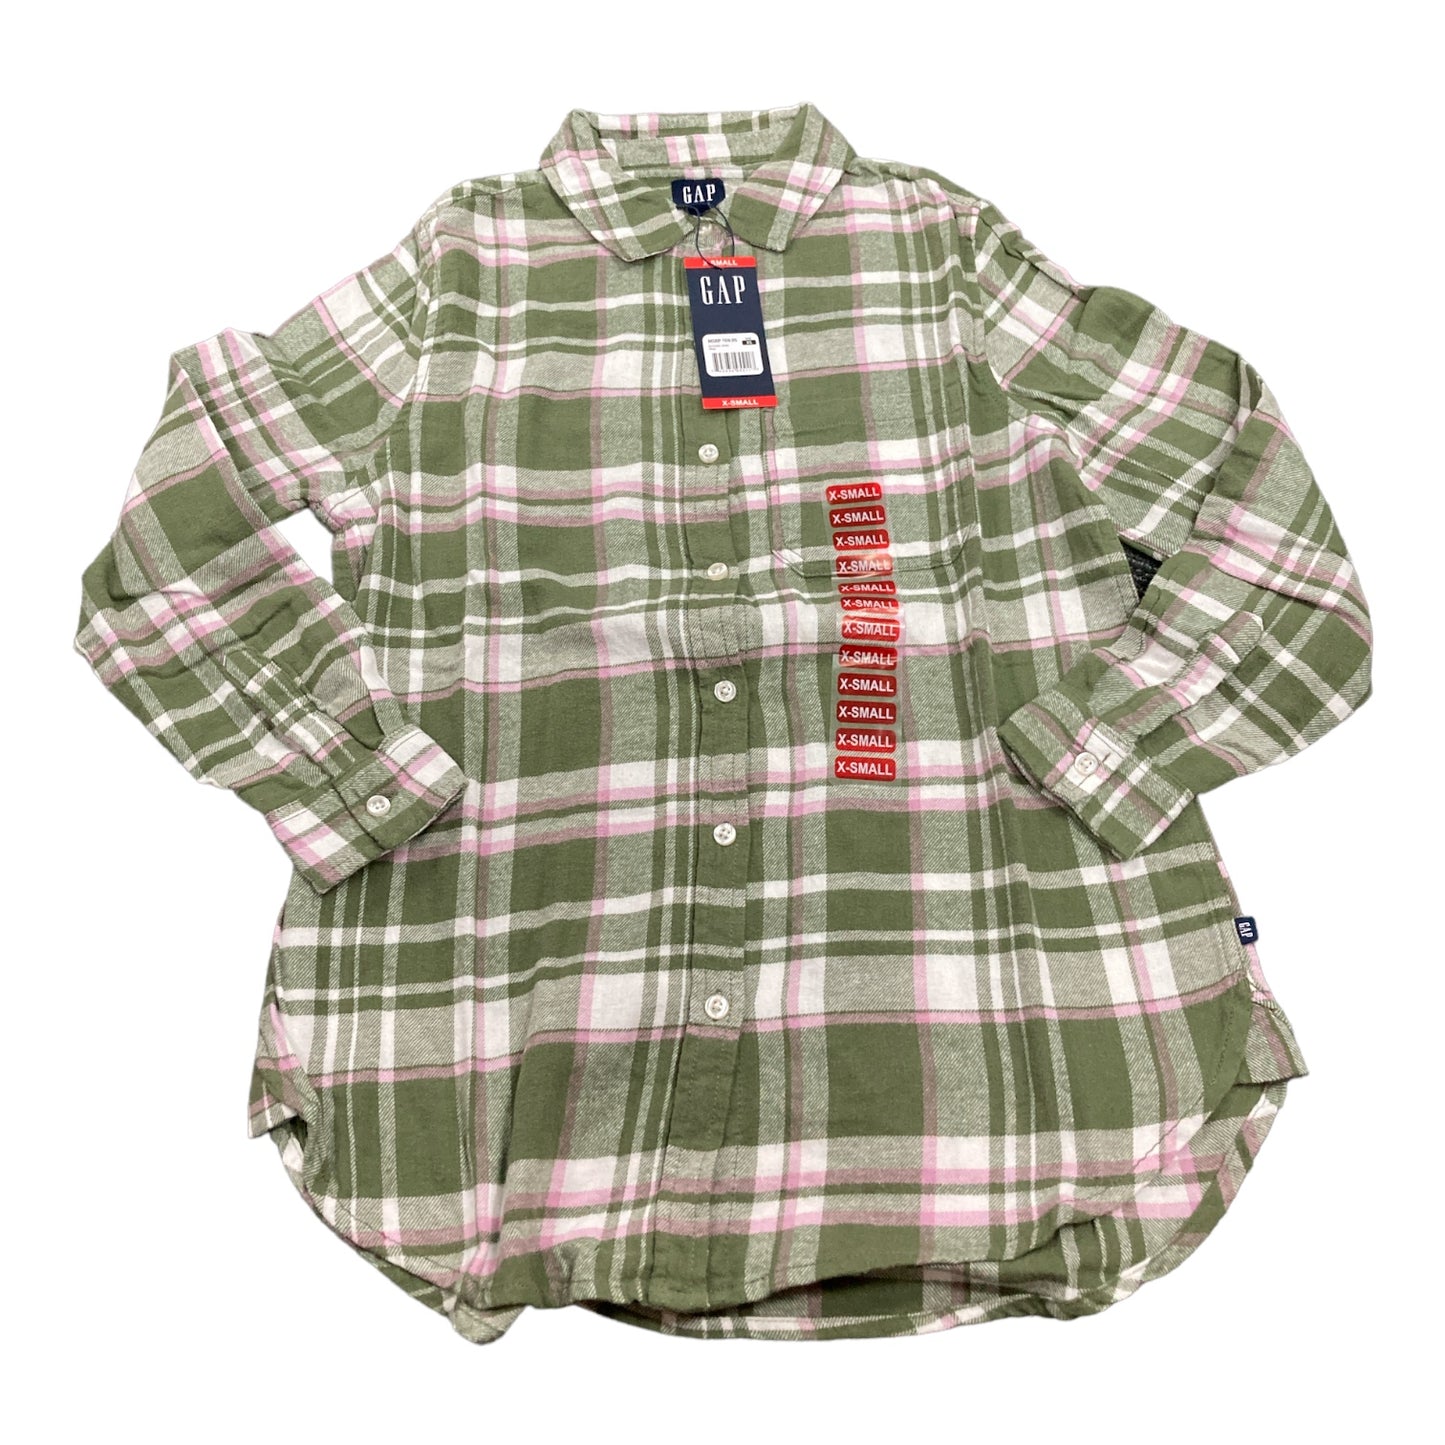 GAP Ladies Button Down Long Sleeve Relaxed Fit Boyfriend Flannel Top